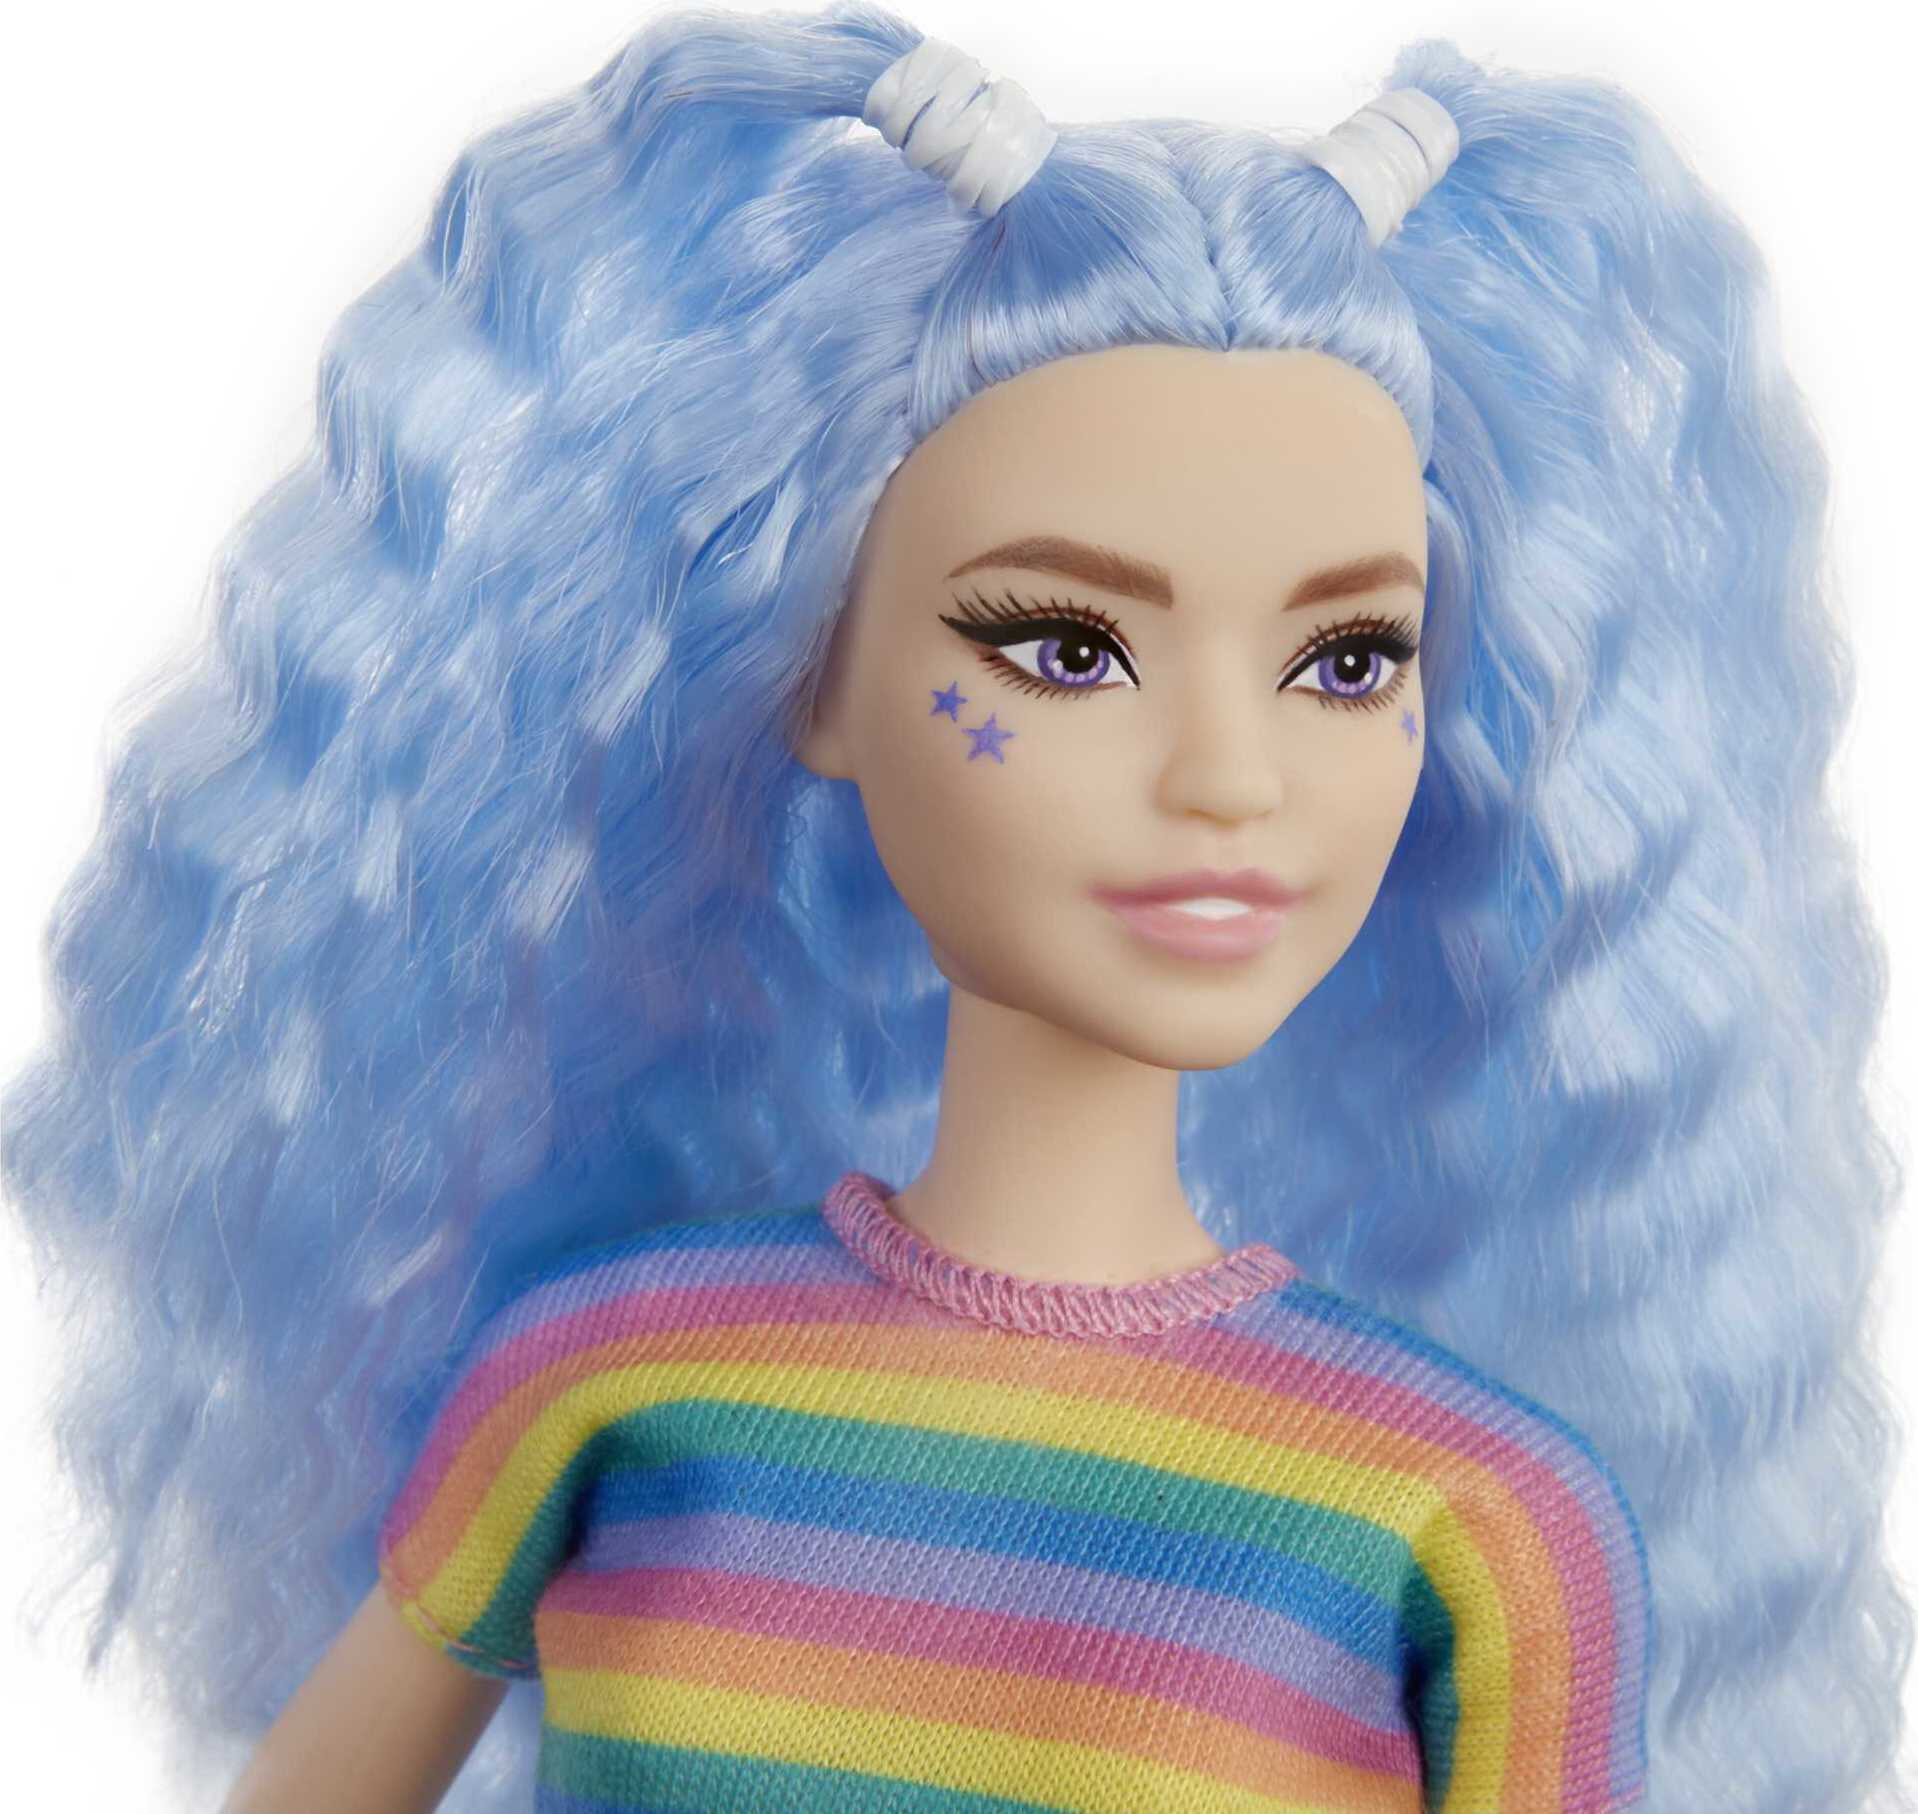 Barbie Fashionistas Doll #170 with Long Blue Crimped Hair, Star Face Makeup in Striped Tee - image 5 of 7